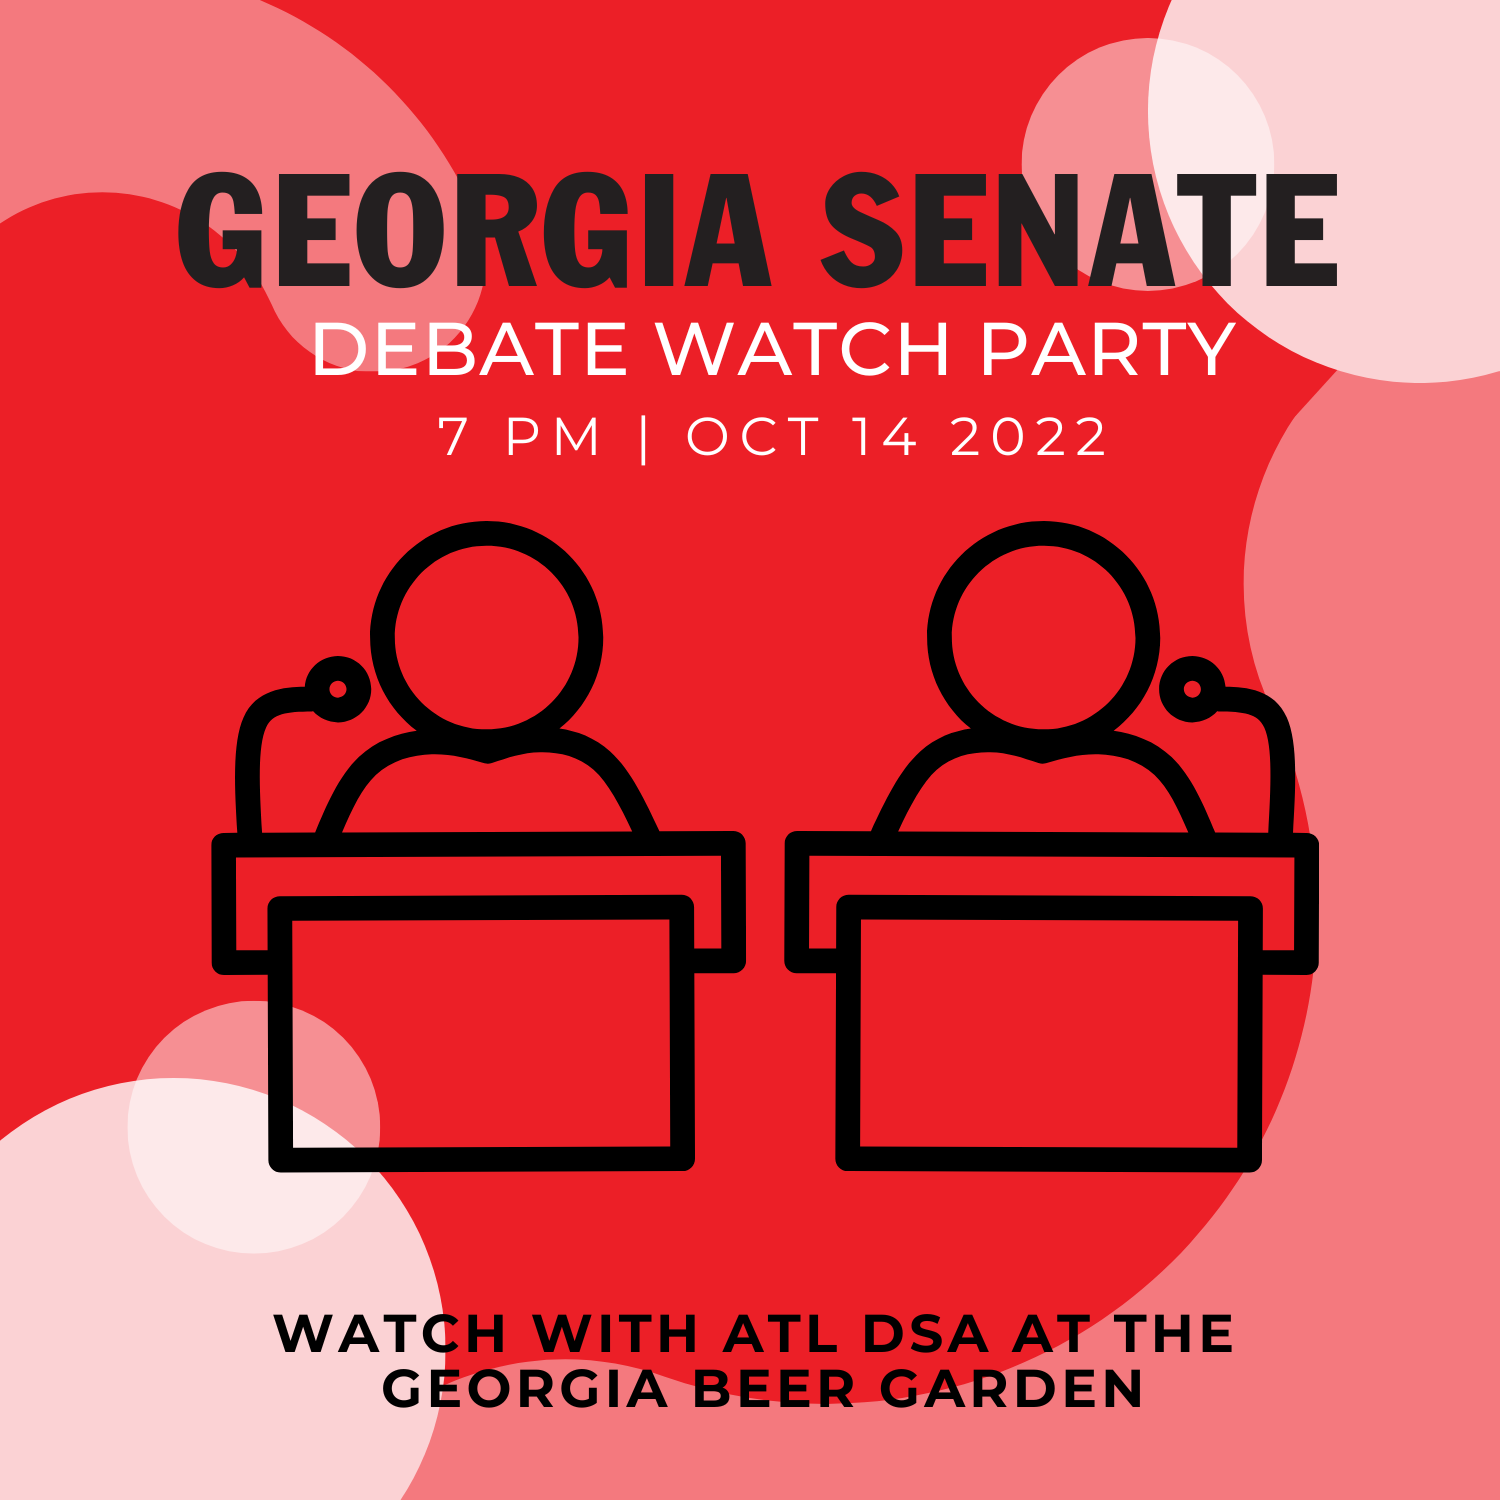 Graphic promoting the Georgia Senate Debate Watch Party on October 14th at 7 PM